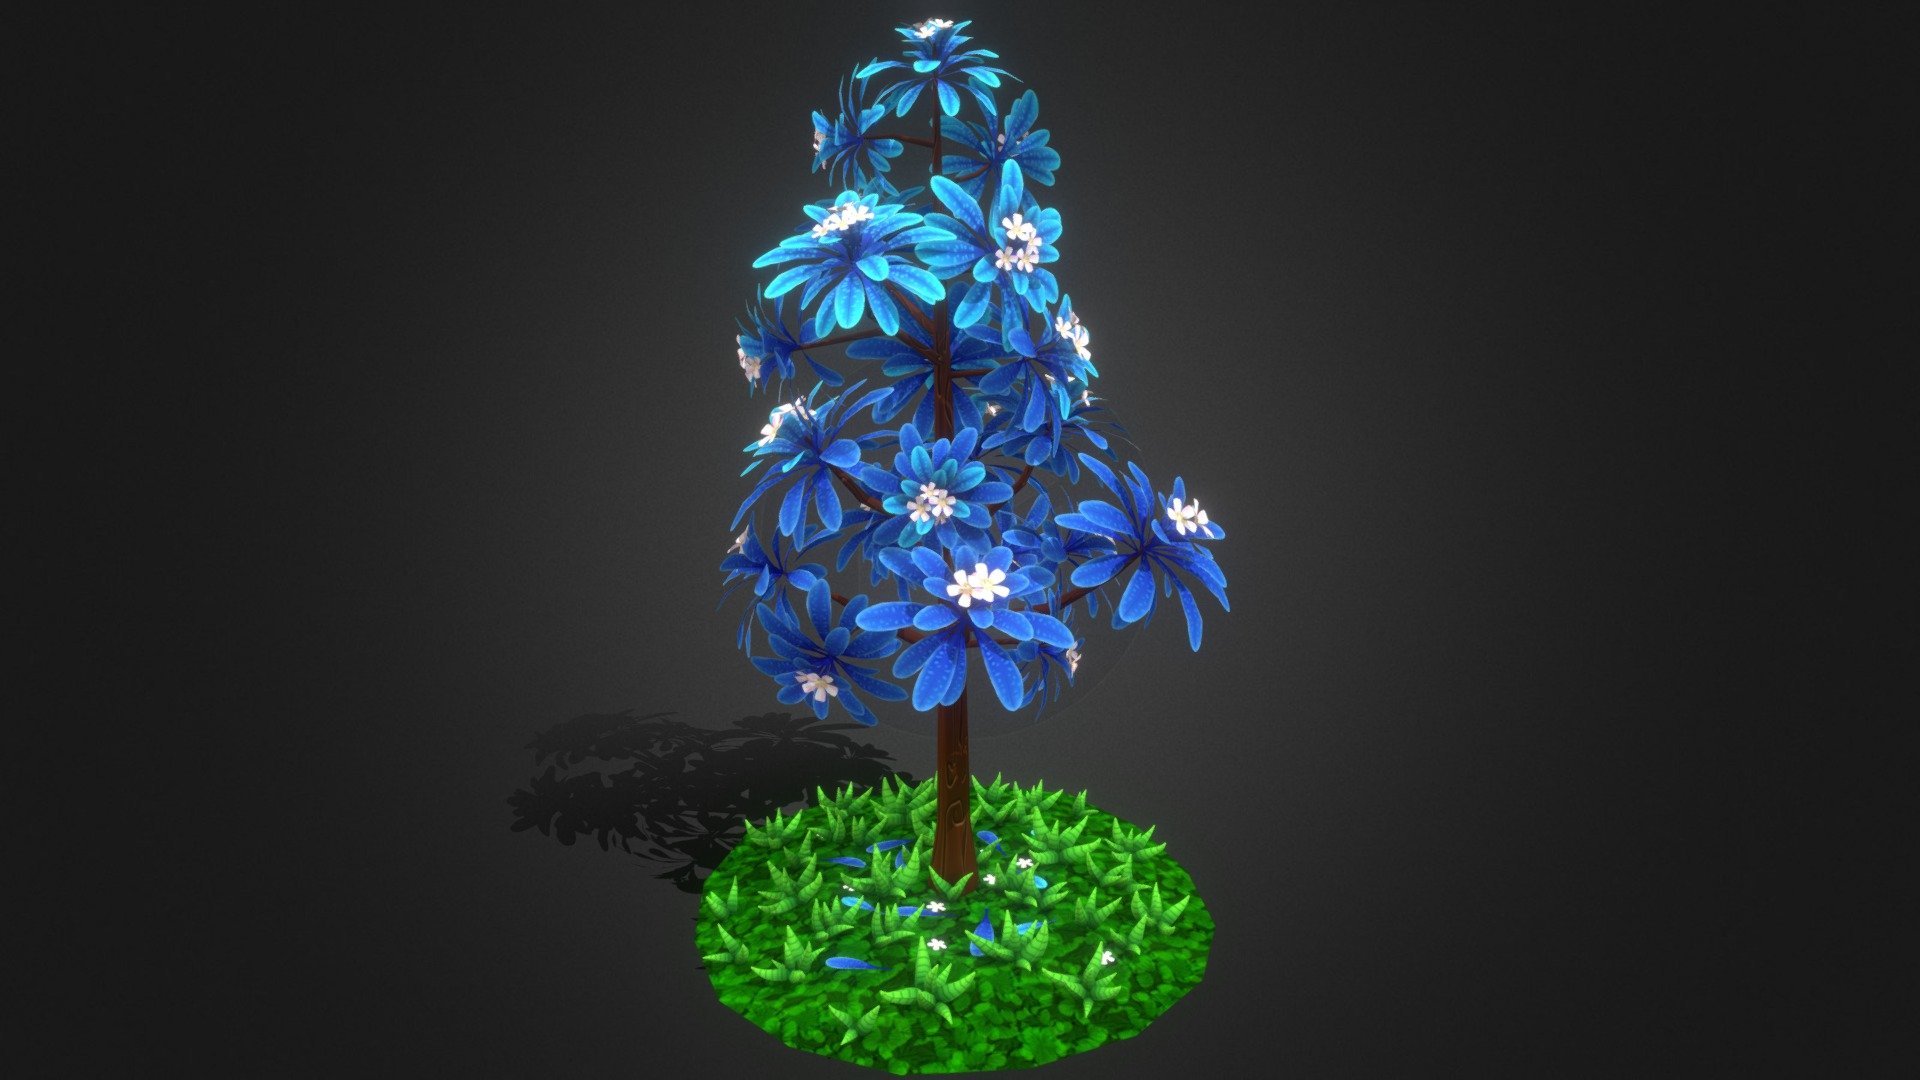 Used Blender &amp; Krita to create this sylized handpainted tree.
Hope you like it - Stylized Hand Painted Tree - Download Free 3D model by Satendra Saraswat (@satendra5286) 3d model